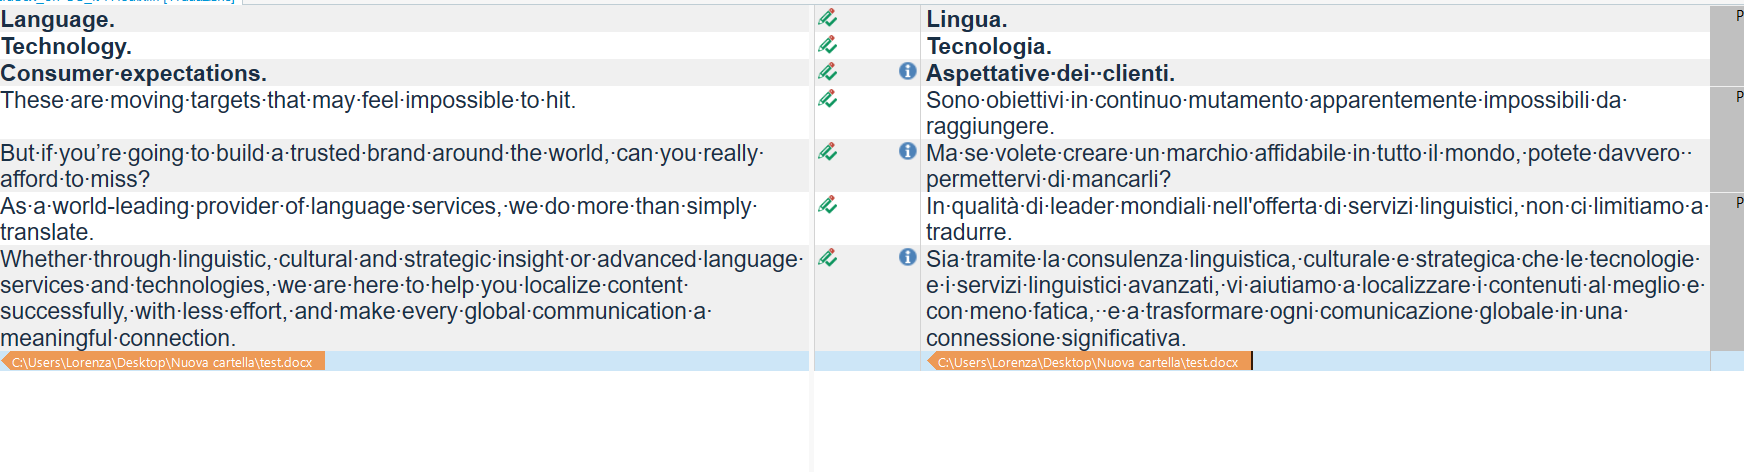 Screenshot of Trados Studio showing a side-by-side comparison of a source document in English and its translation in Italian. The source text includes phrases like 'Language. Technology. Consumer expectations.' and the translated text includes 'Lingua. Tecnologia. Aspettative dei clienti.' No visible errors or warnings.